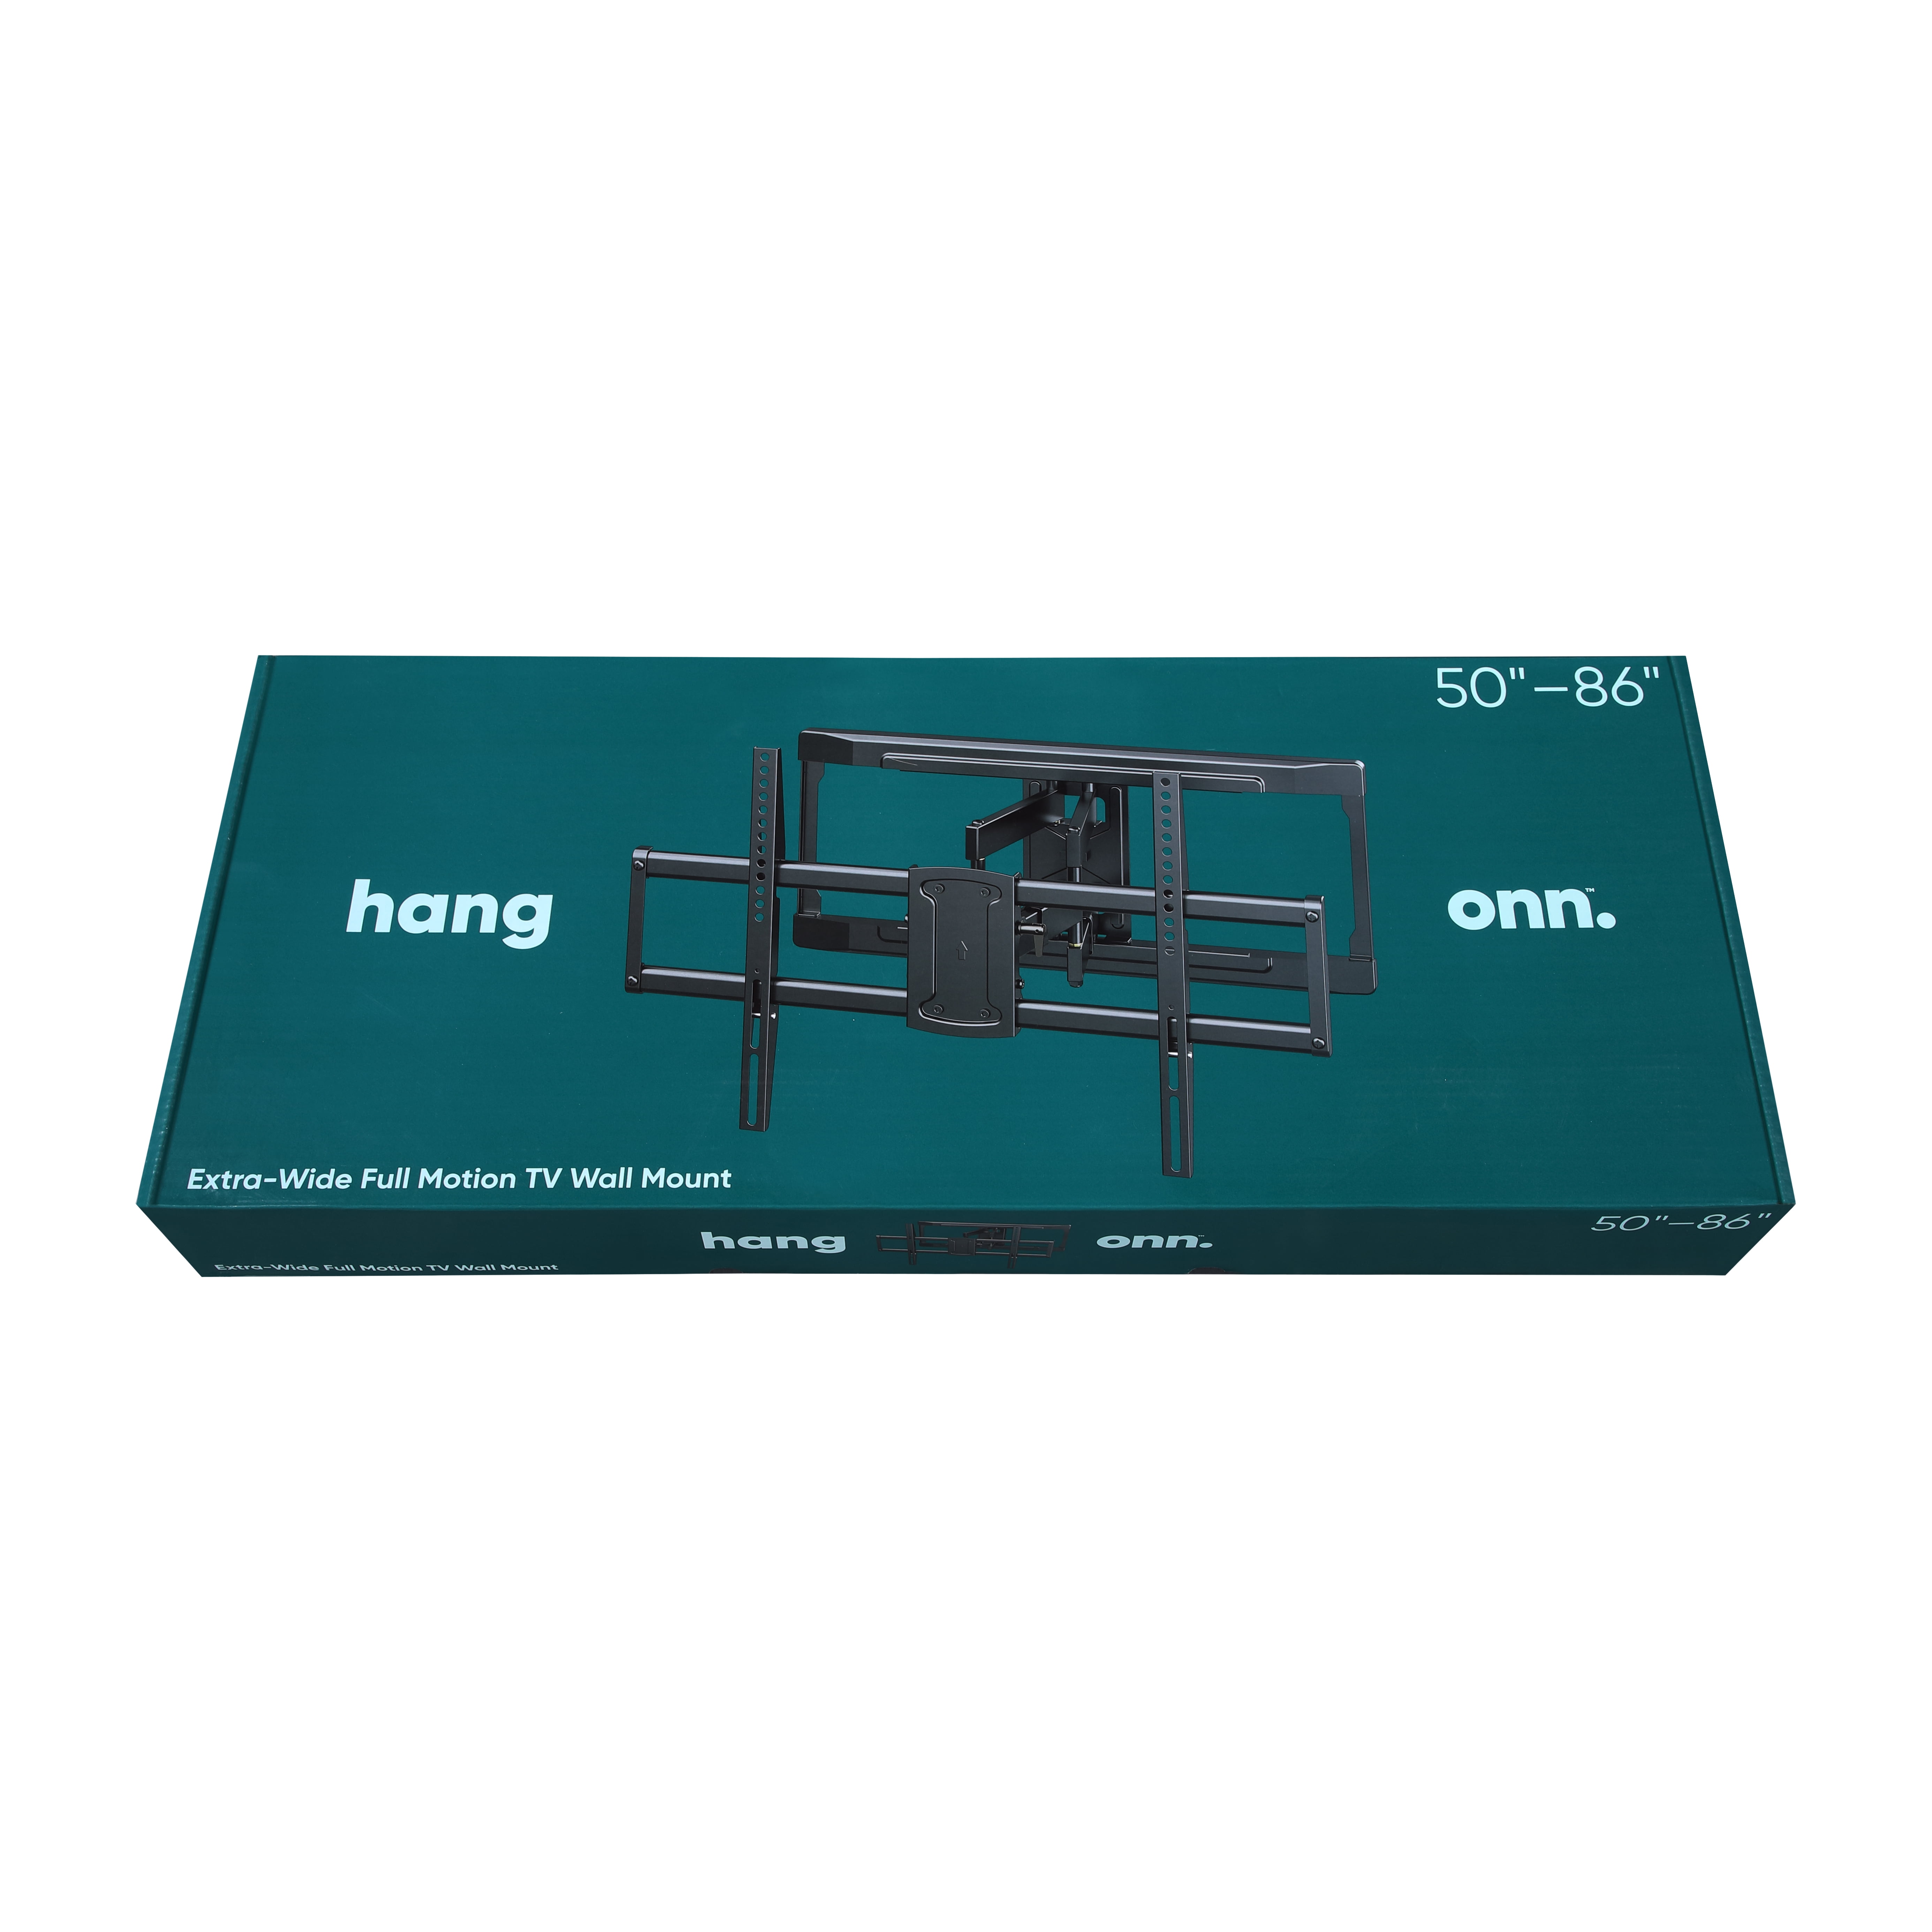 onn. Full Motion TV Wall Mount for 50 to 86 TVs, up to 15° Tilting 